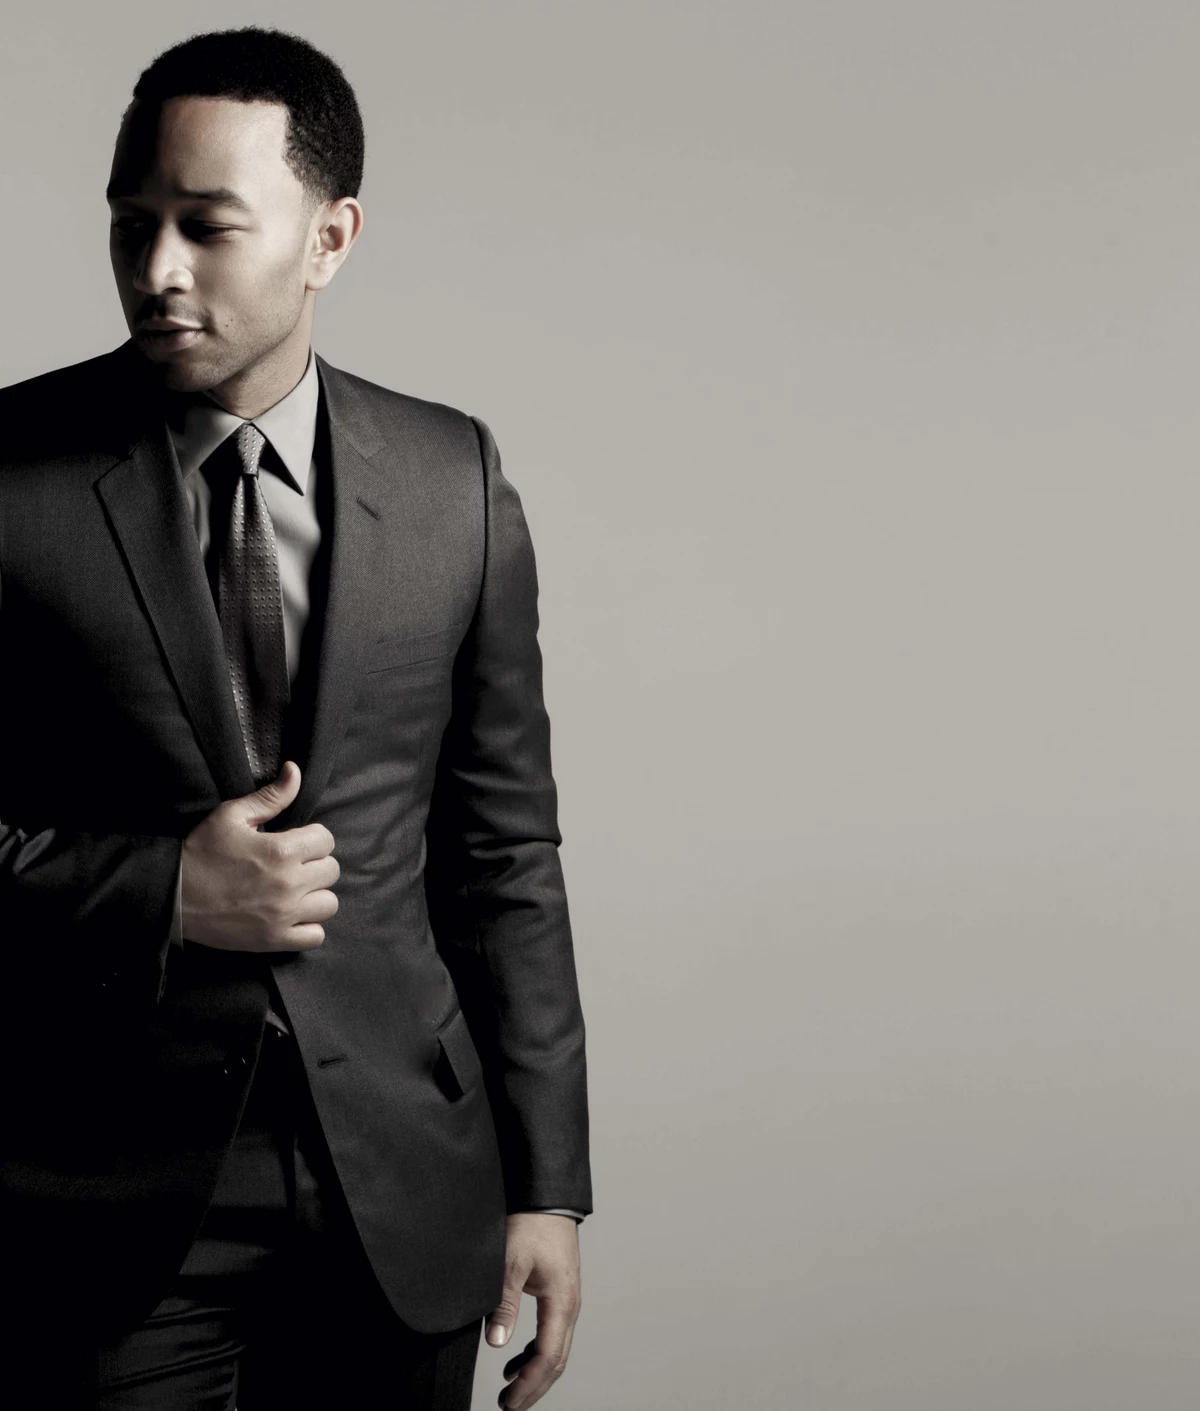 Specially Priced Tickets Released for John Legend Show at the ...